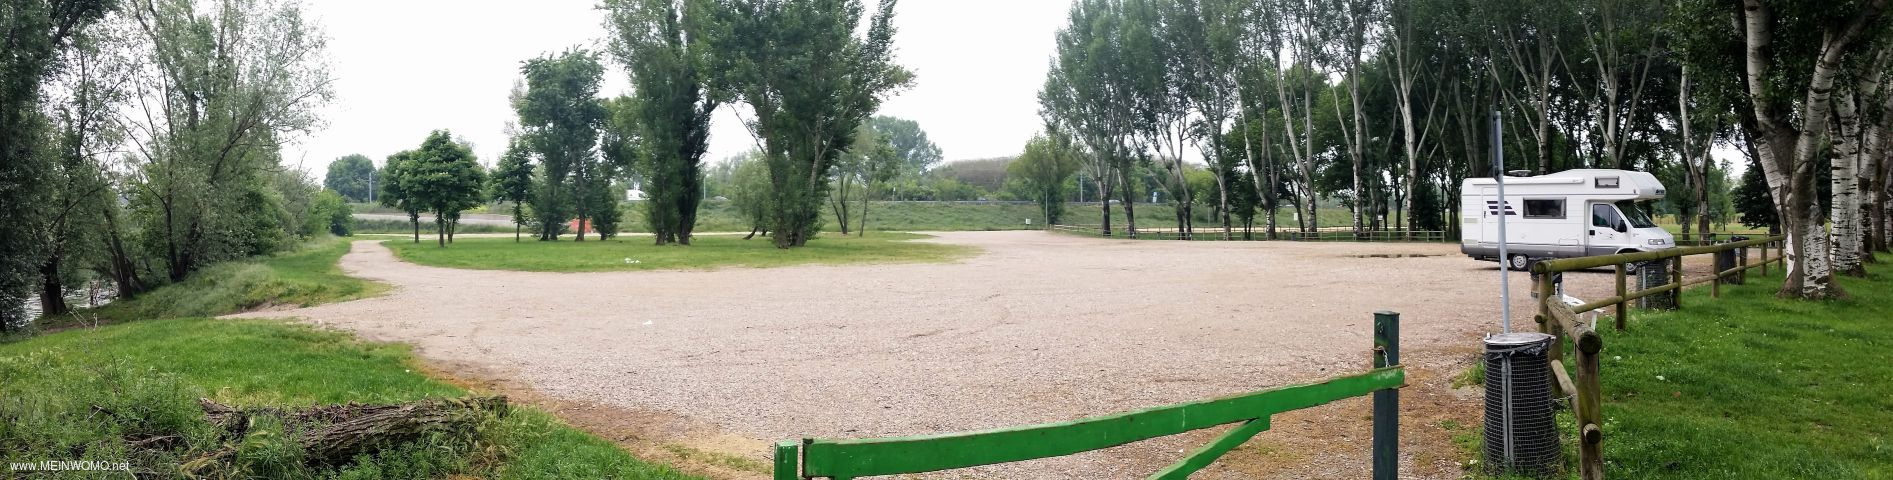  05/2017: Great place with adjoining picnic area..  In the background is raised to see the road.